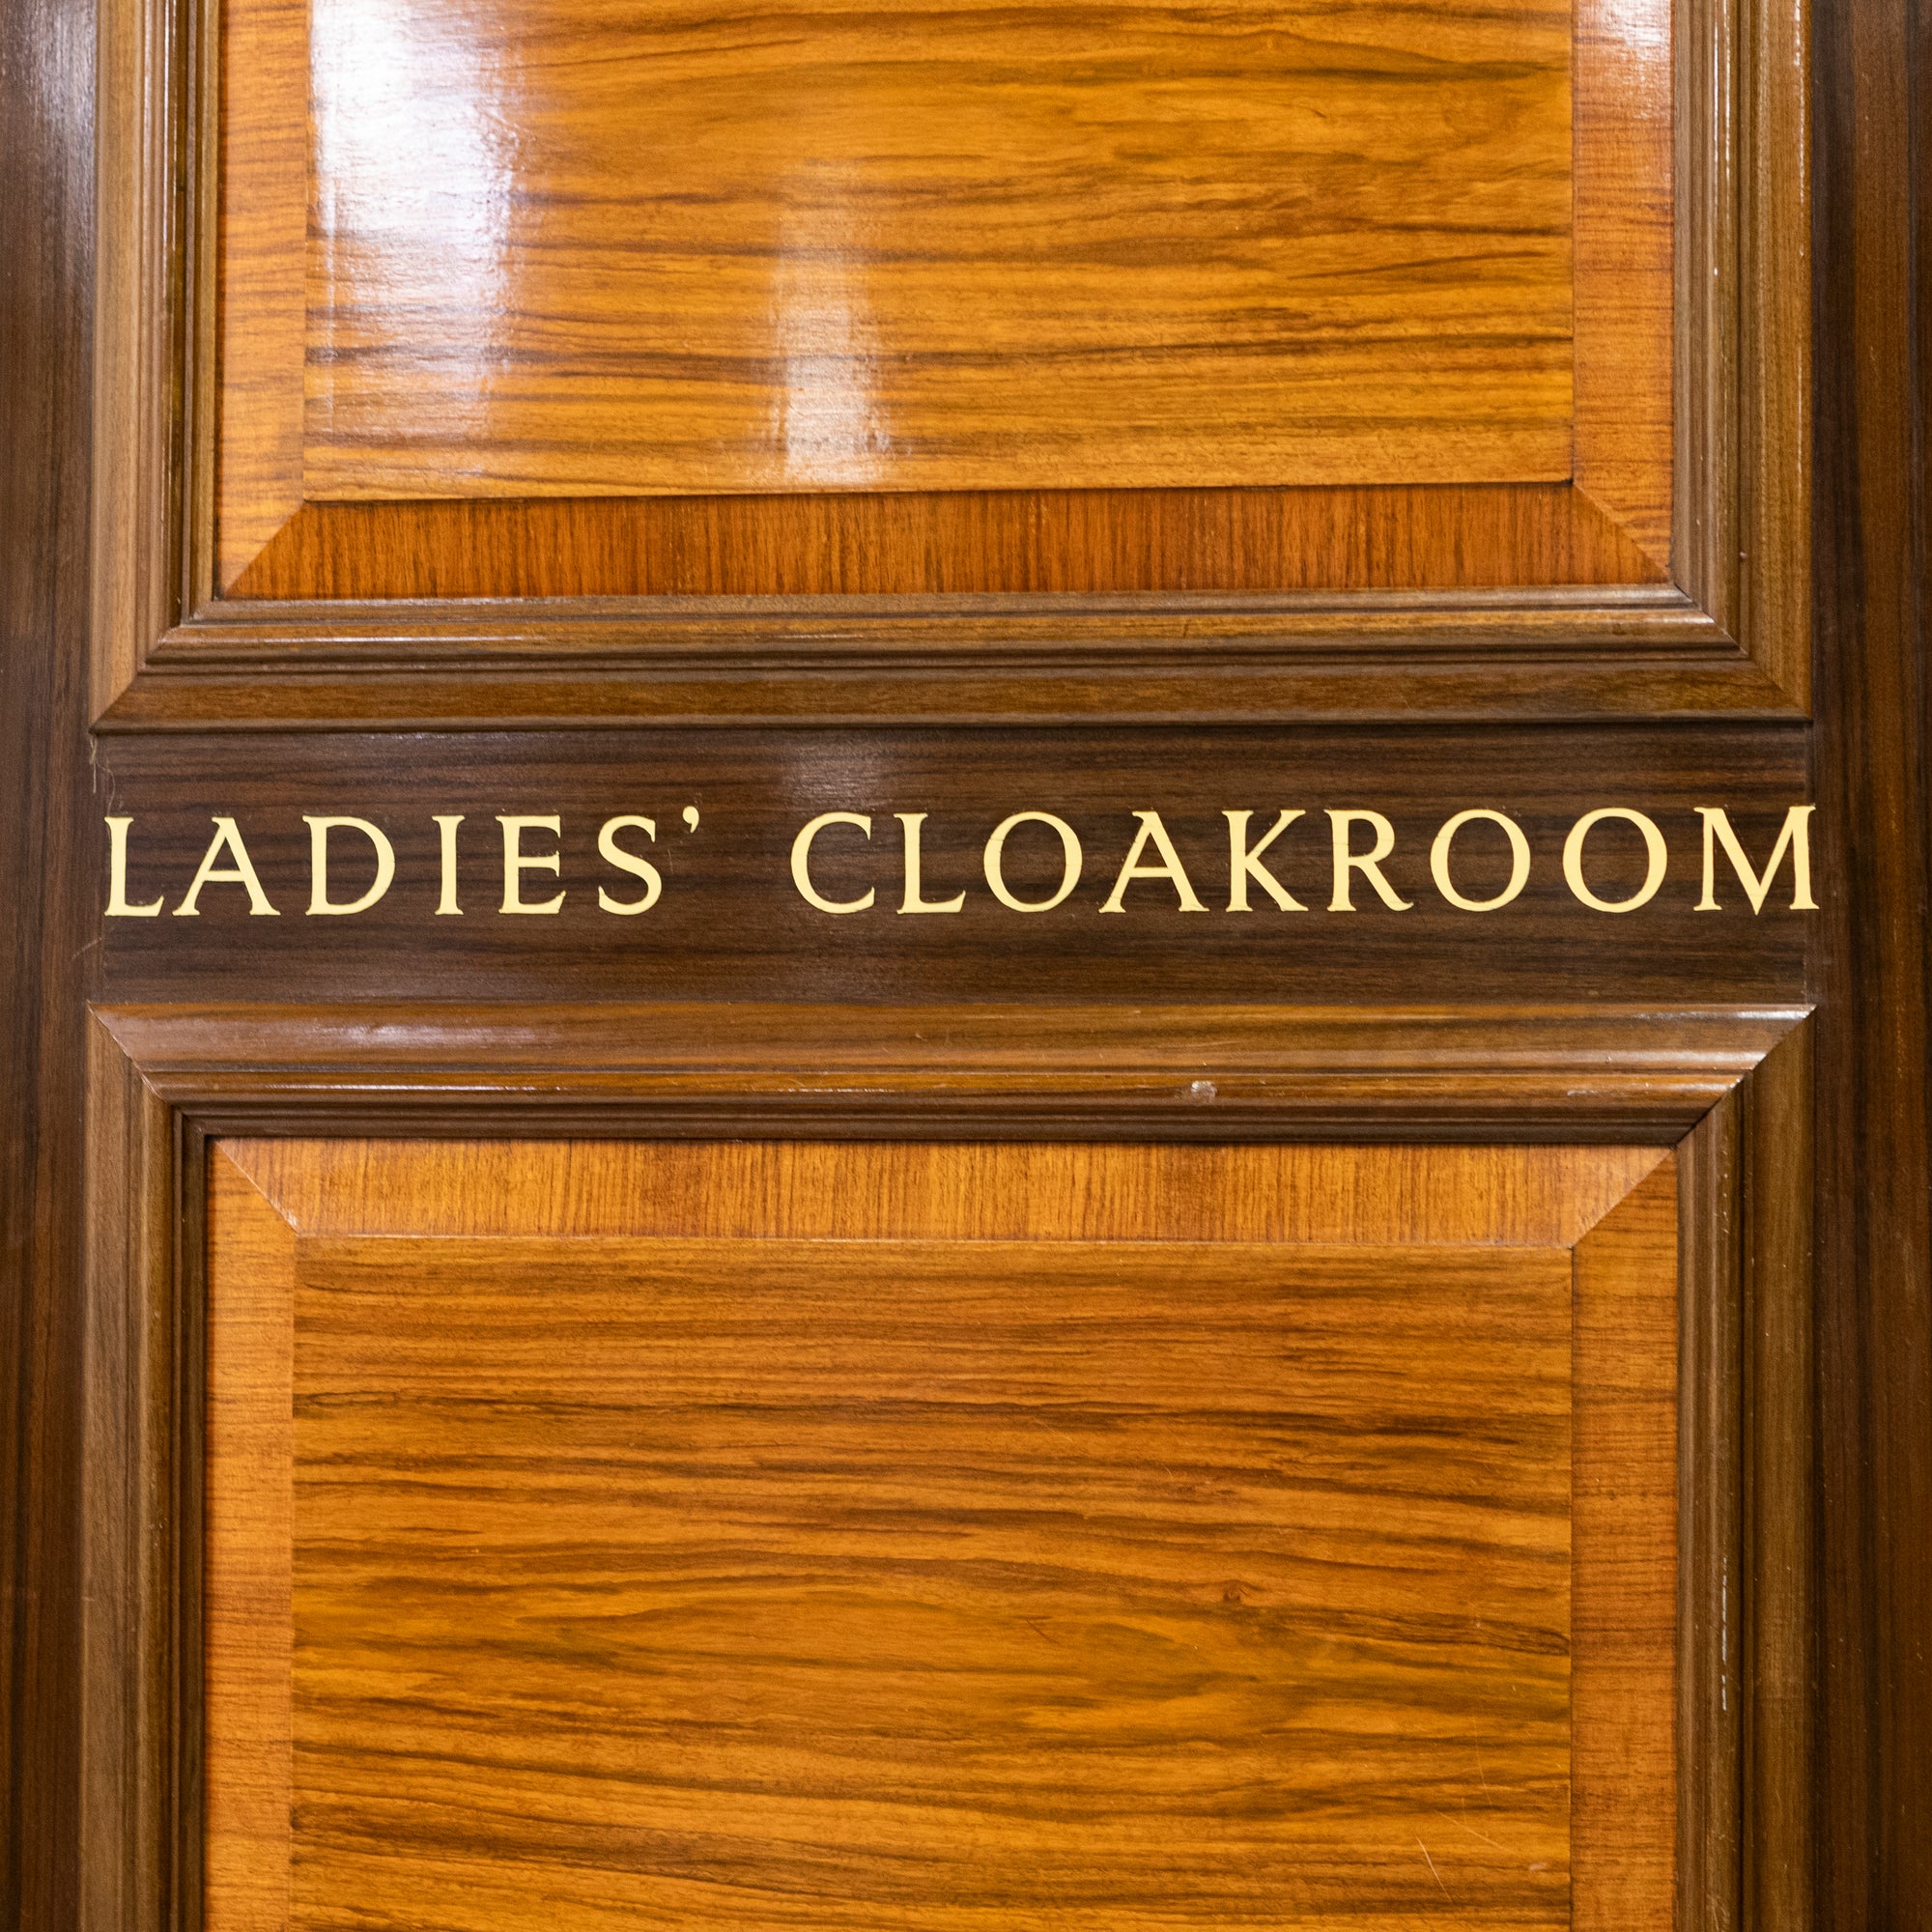 Walnut Cloakroom Doors Reclaimed From Clothworkers' Hall | The Architectural Forum